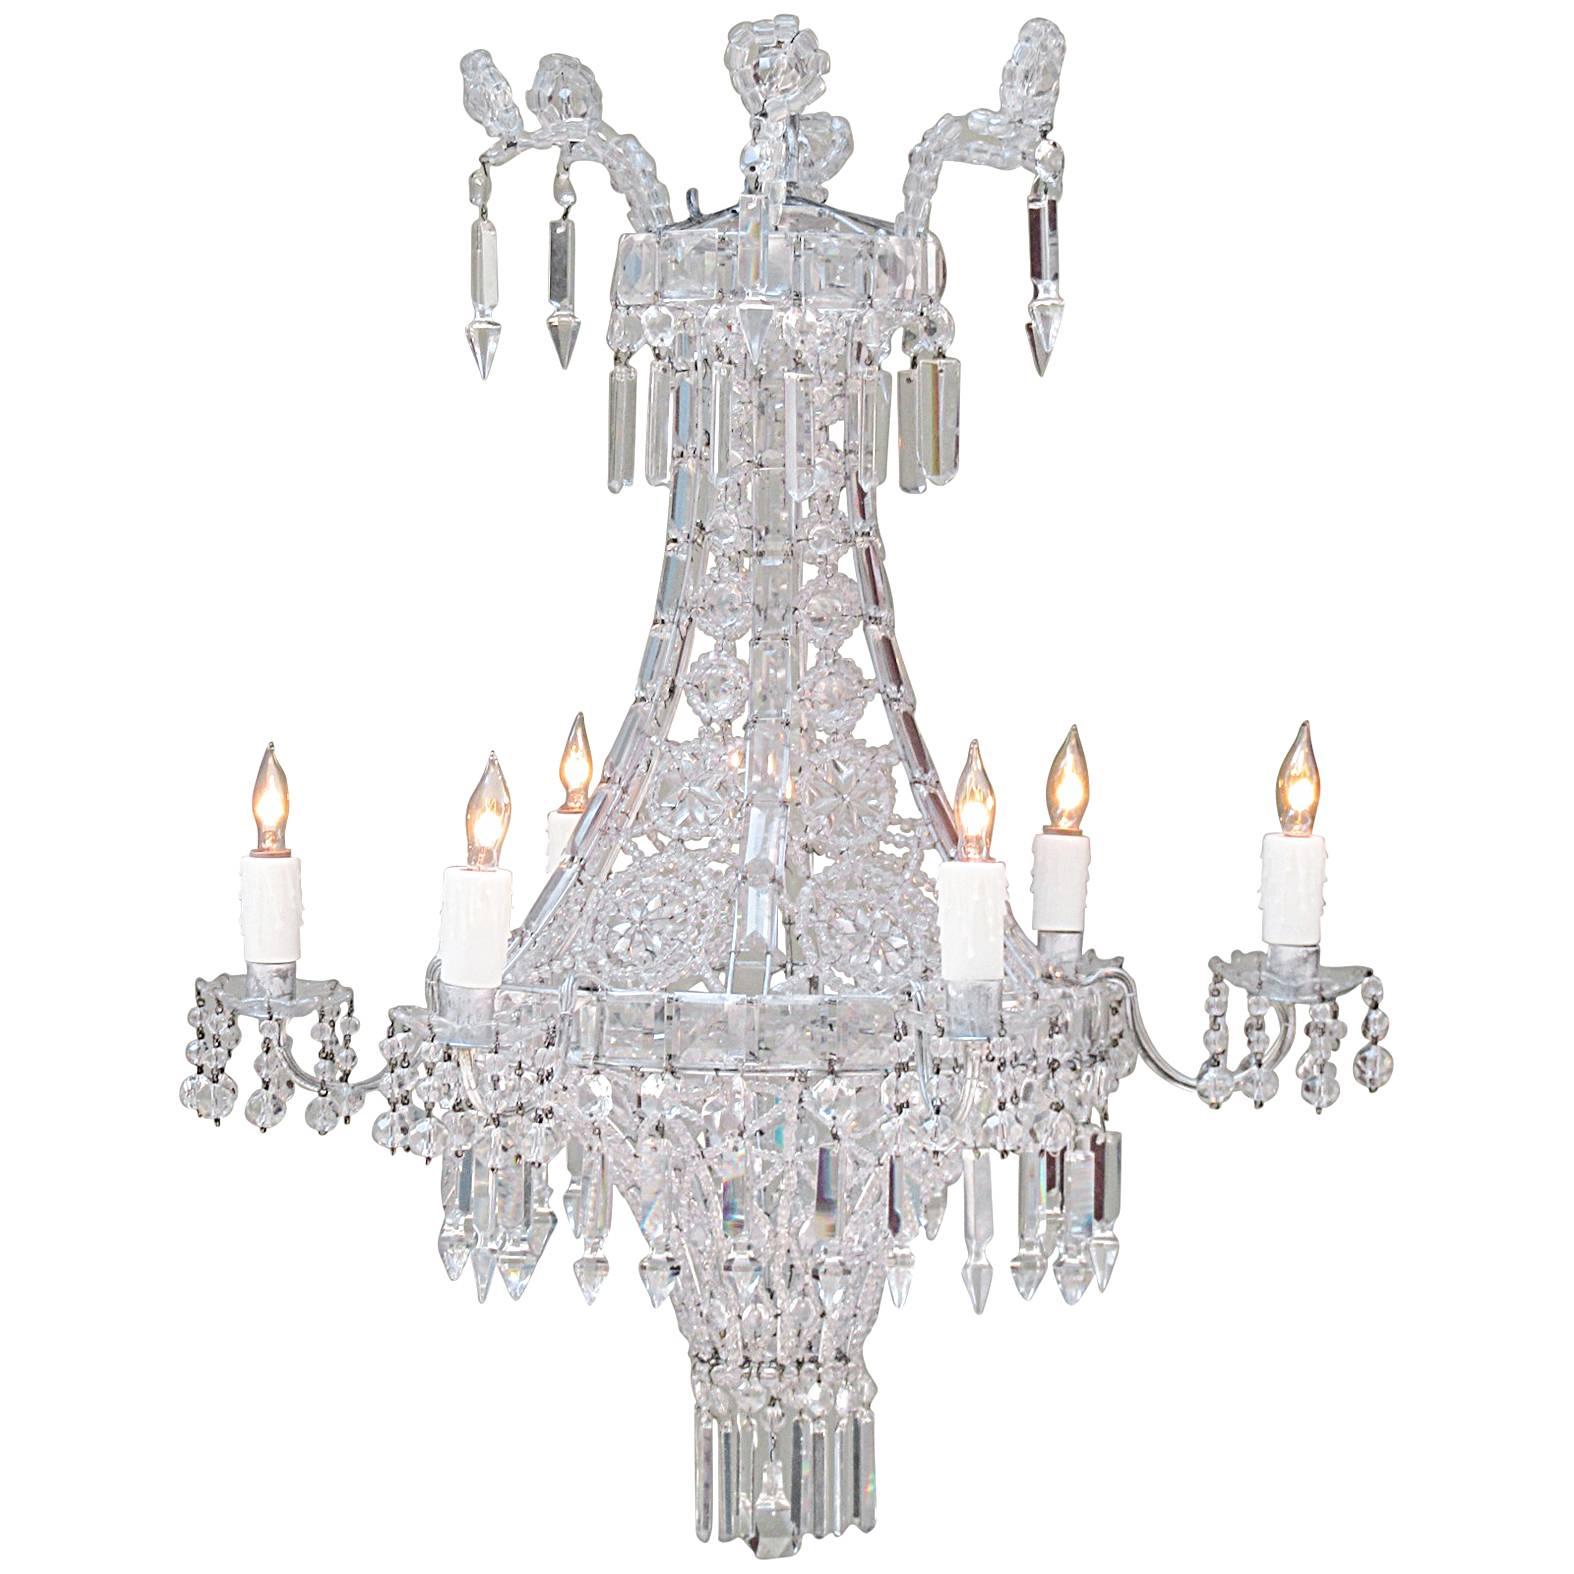 Early 20th Century Italian Neoclassical Crystal and Tole Chandelier